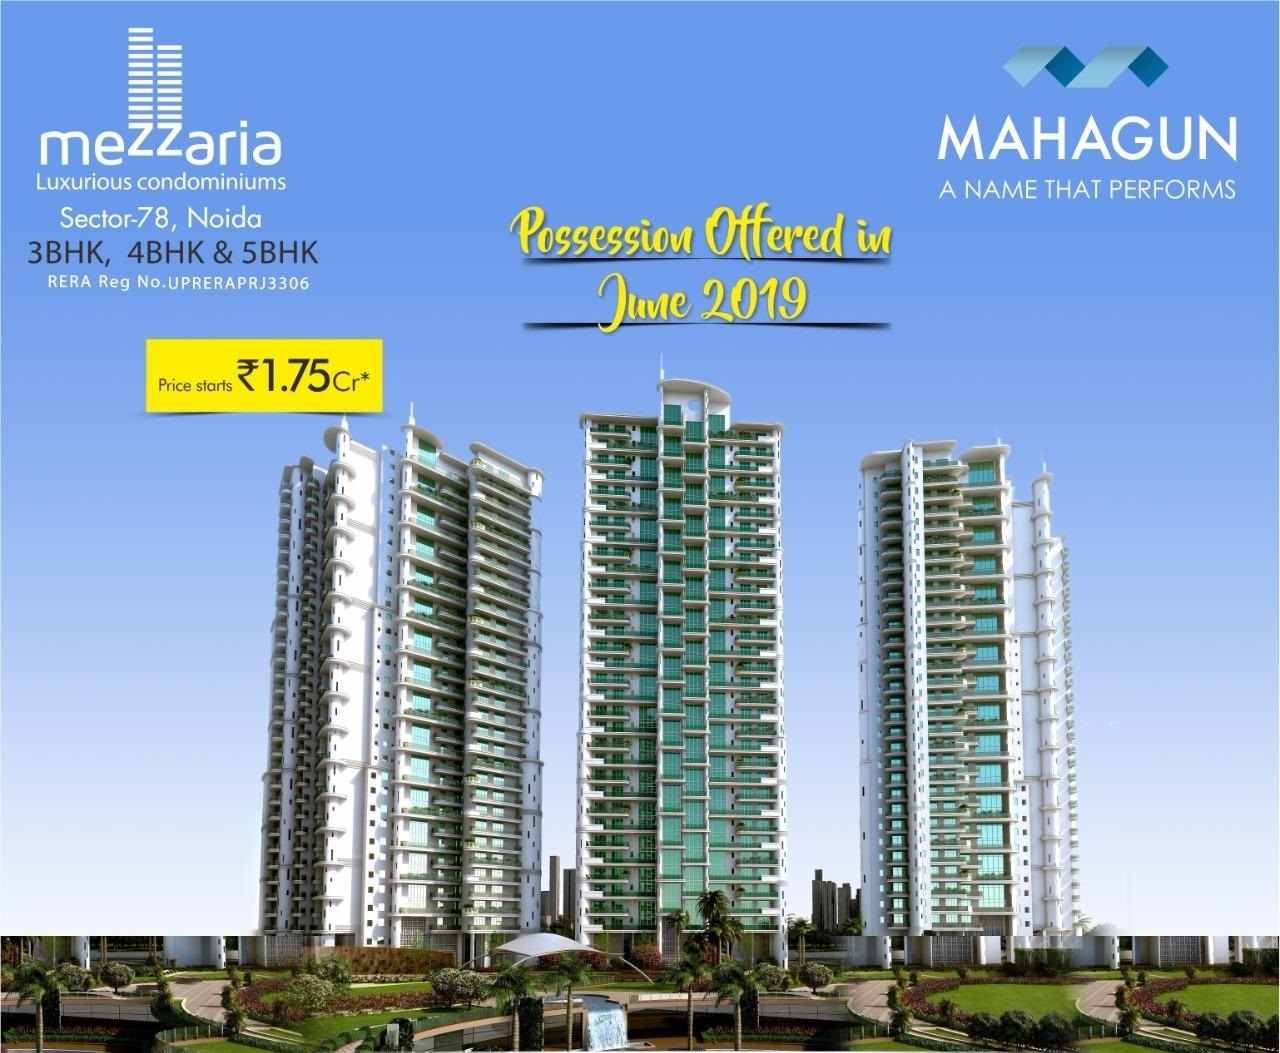 Mahagun Mezzaria is now reaching the stage of possession in Noida Update